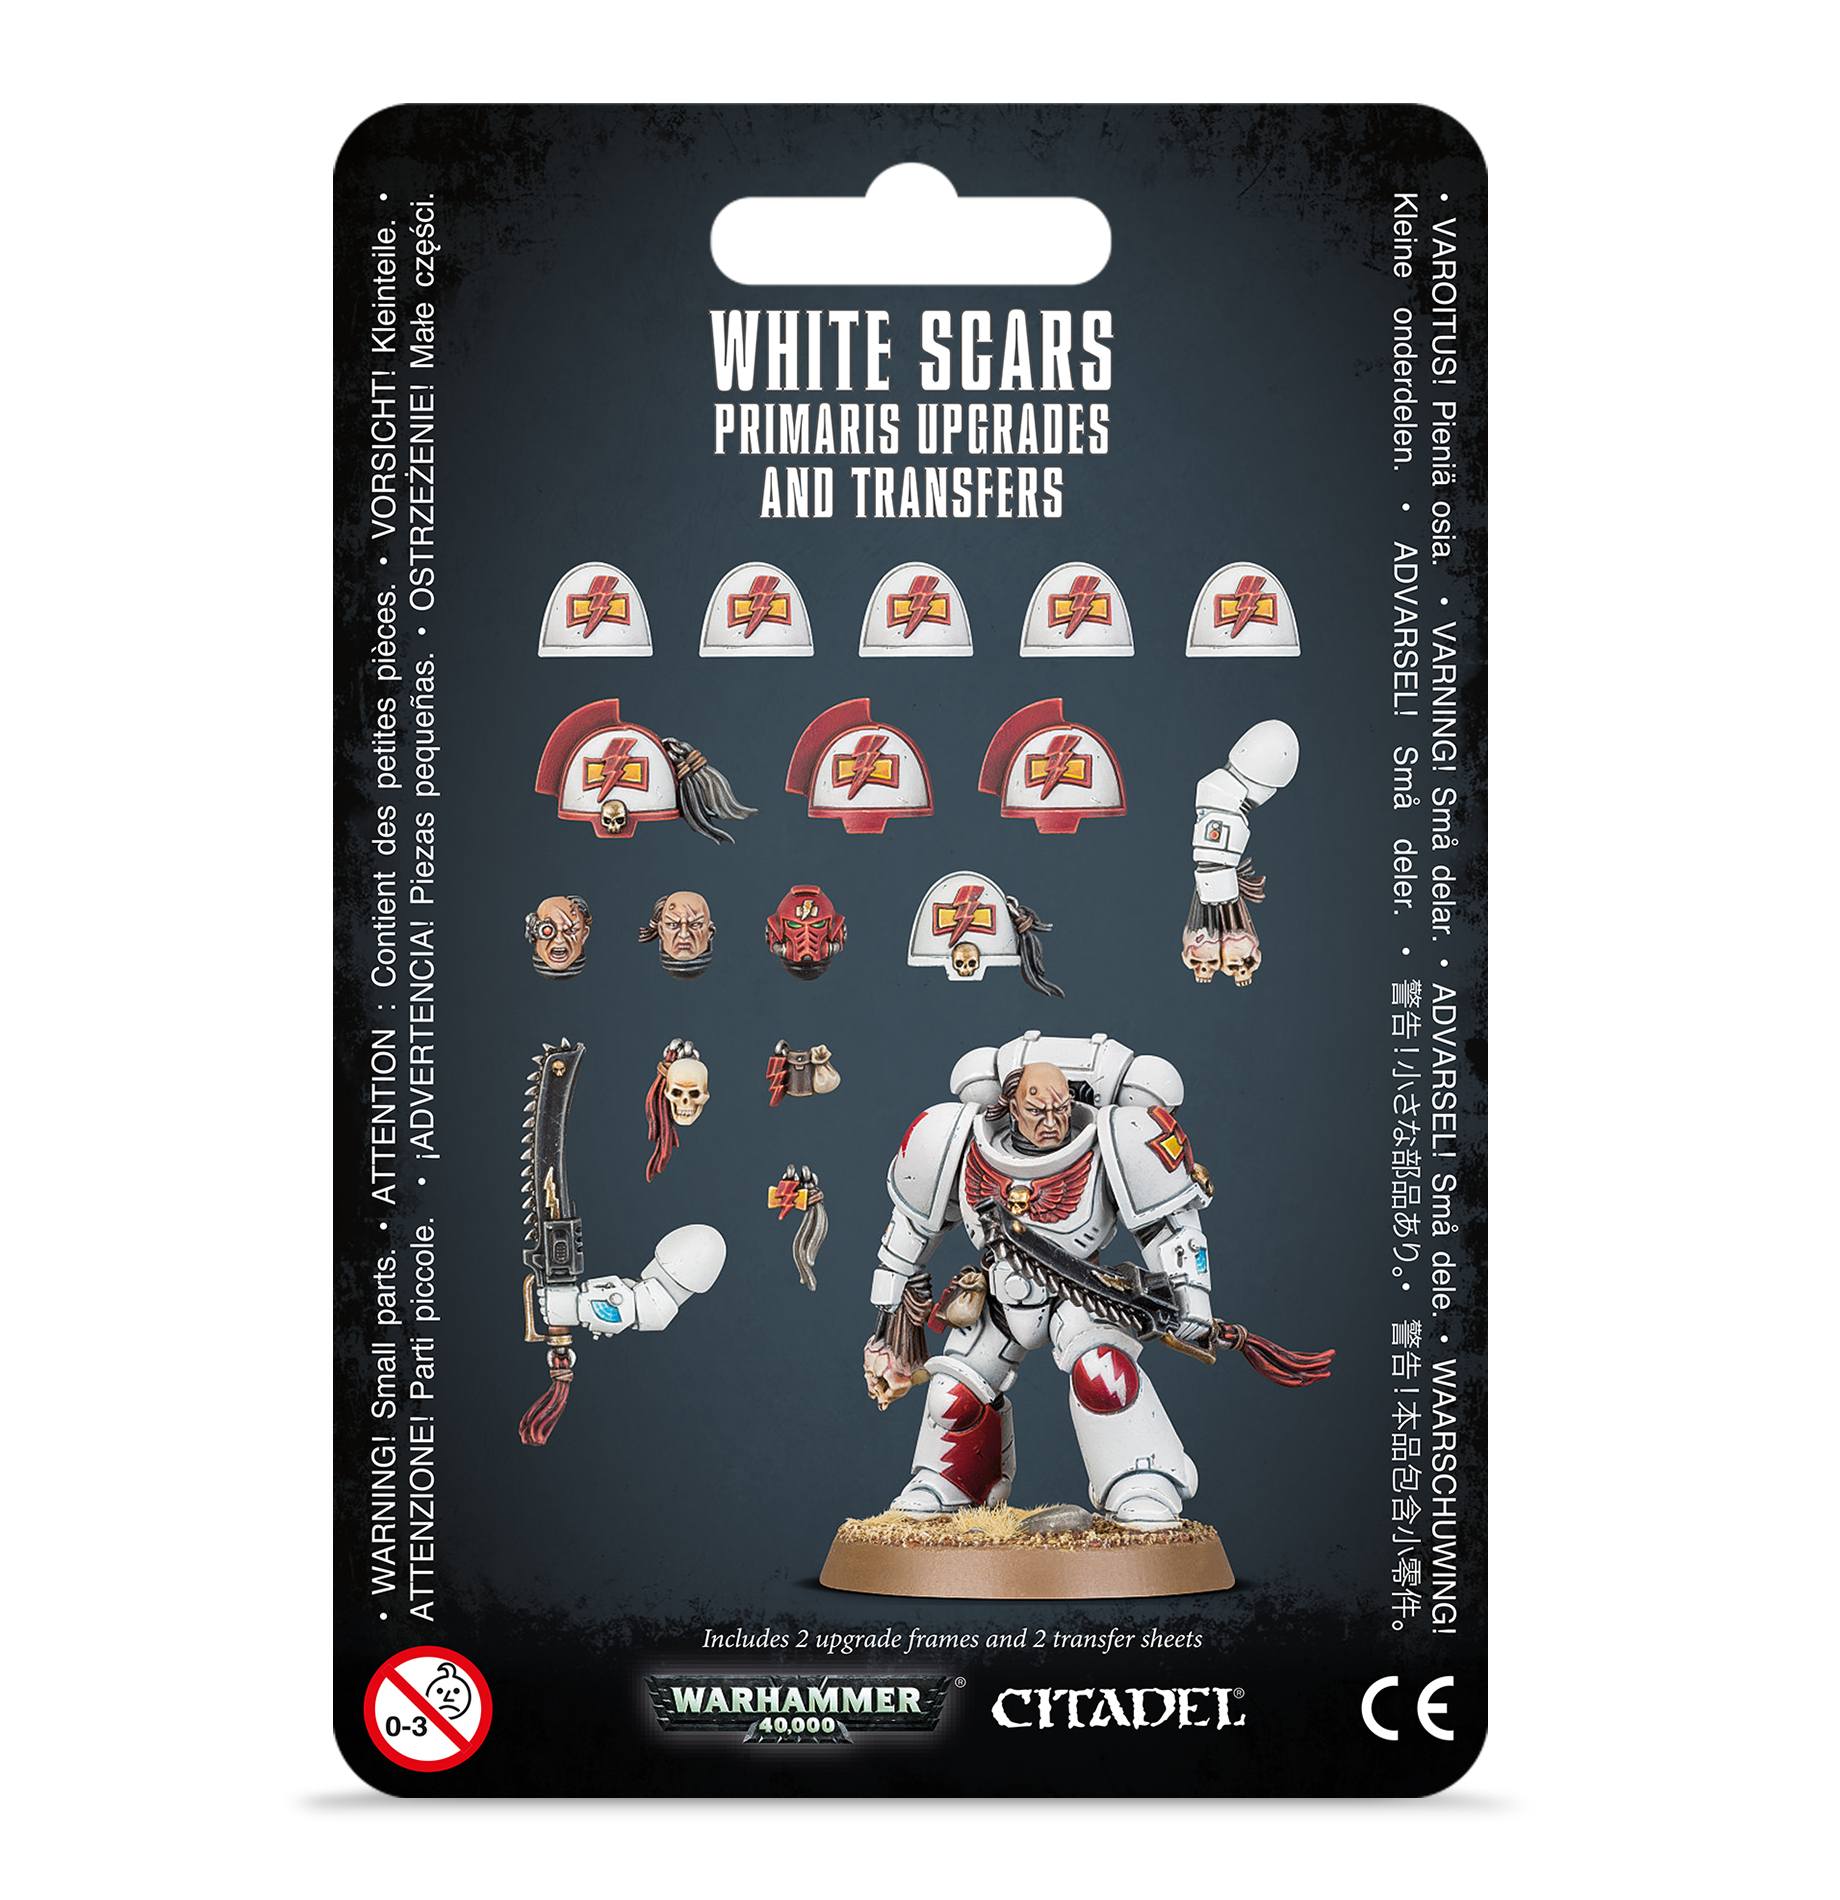 WHITE SCAR PRIMARIS UPGRADES & TRANSFERS White Scars Games Workshop    | Red Claw Gaming